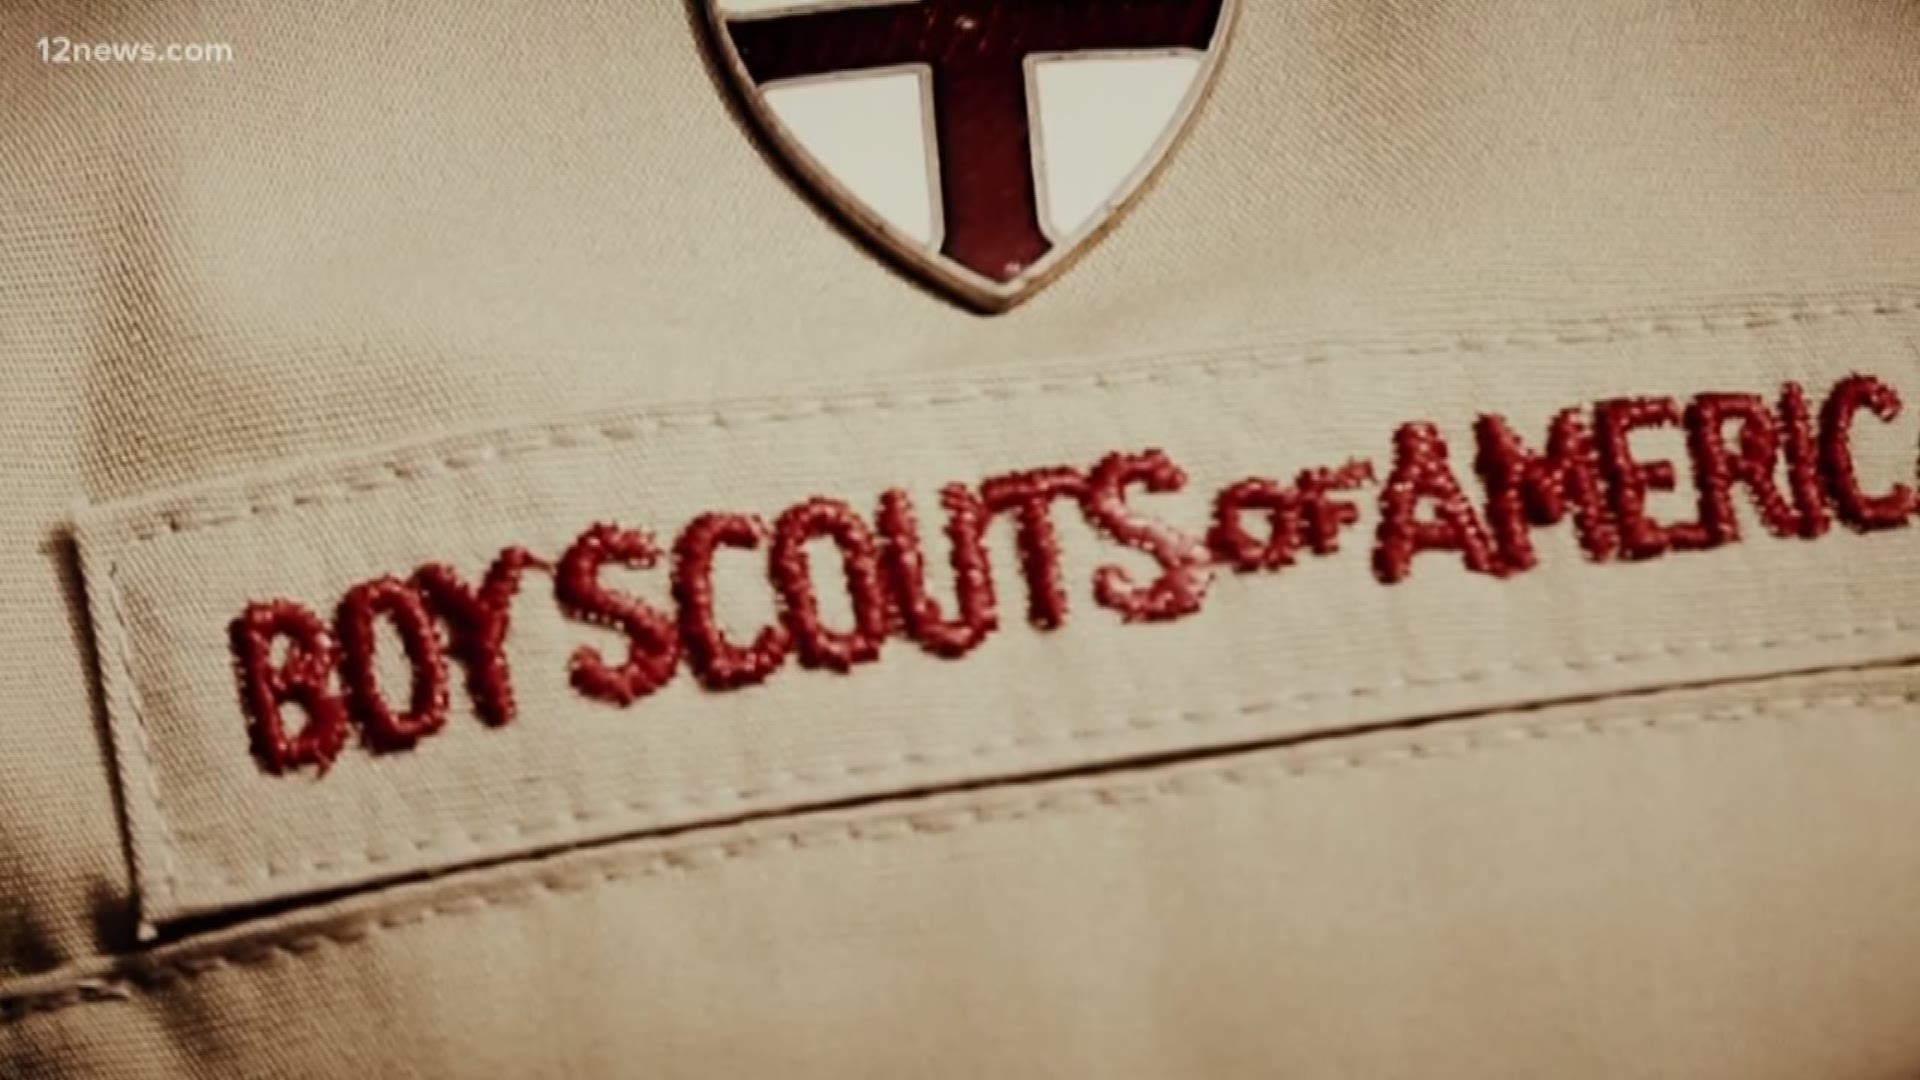 The Boy Scouts of America made public back in 2005 a list of suspected or known abusers that went back decades. A new lawsuit alleges there are more names, more than 350, that had not been previously identified. Four of the 350 new names have connections to Arizona.